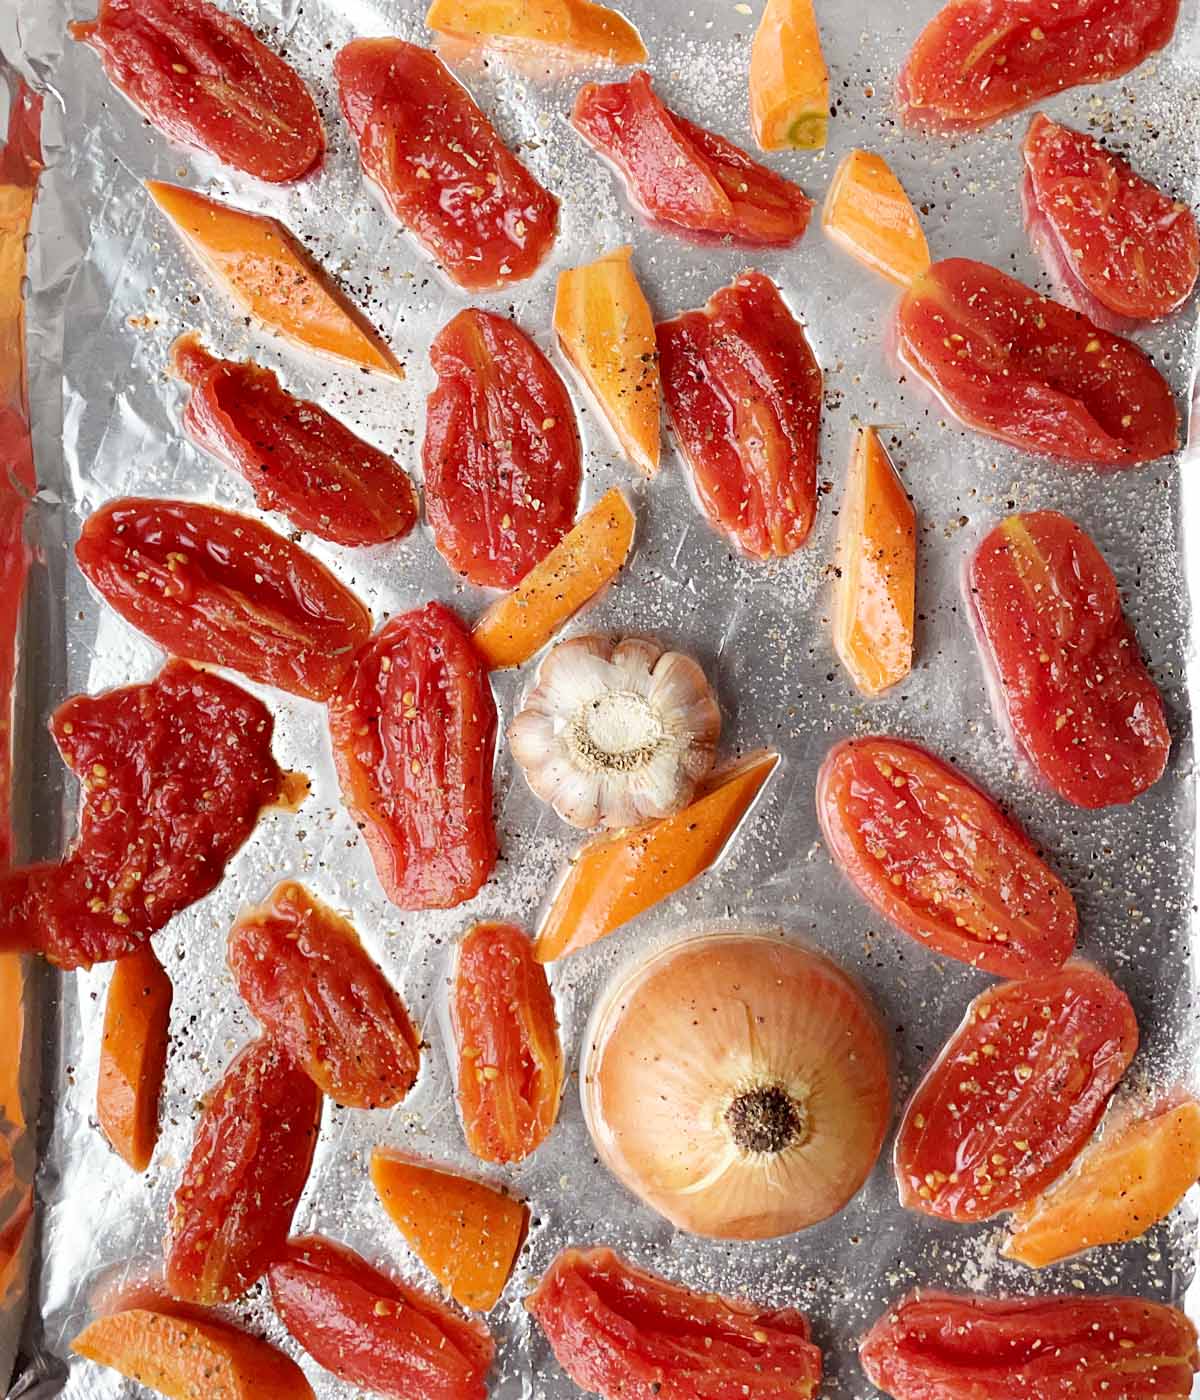 Sliced red tomatoes, carrot chunks, a bulb of garlic, and half an onion on a foil-lined baking sheet.